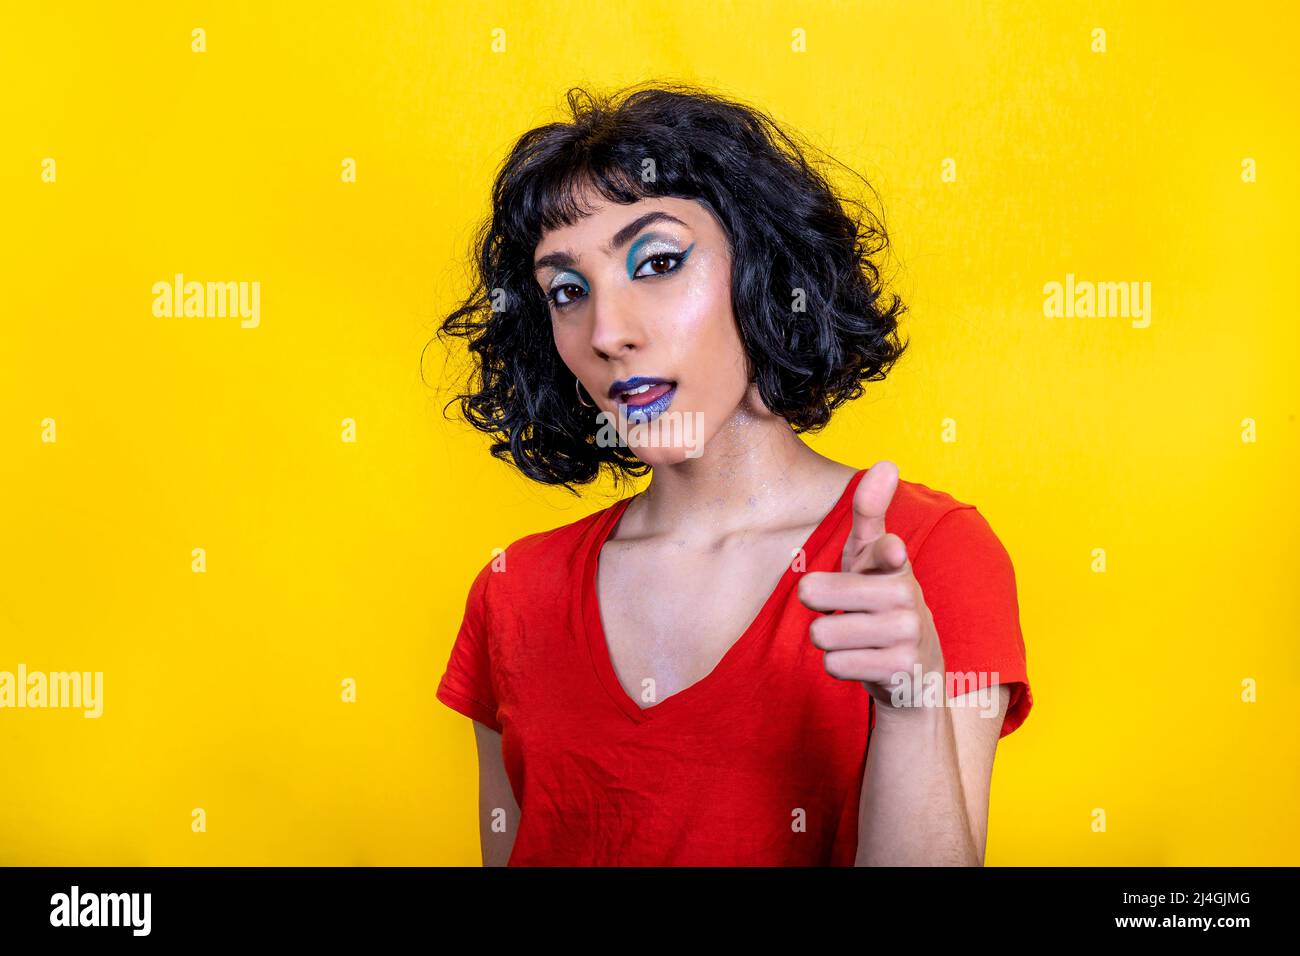 Smiling young woman in red t-shirt is pointing at you. Woman portrait with trendy look and bright colors on yellow background. Stock Photo